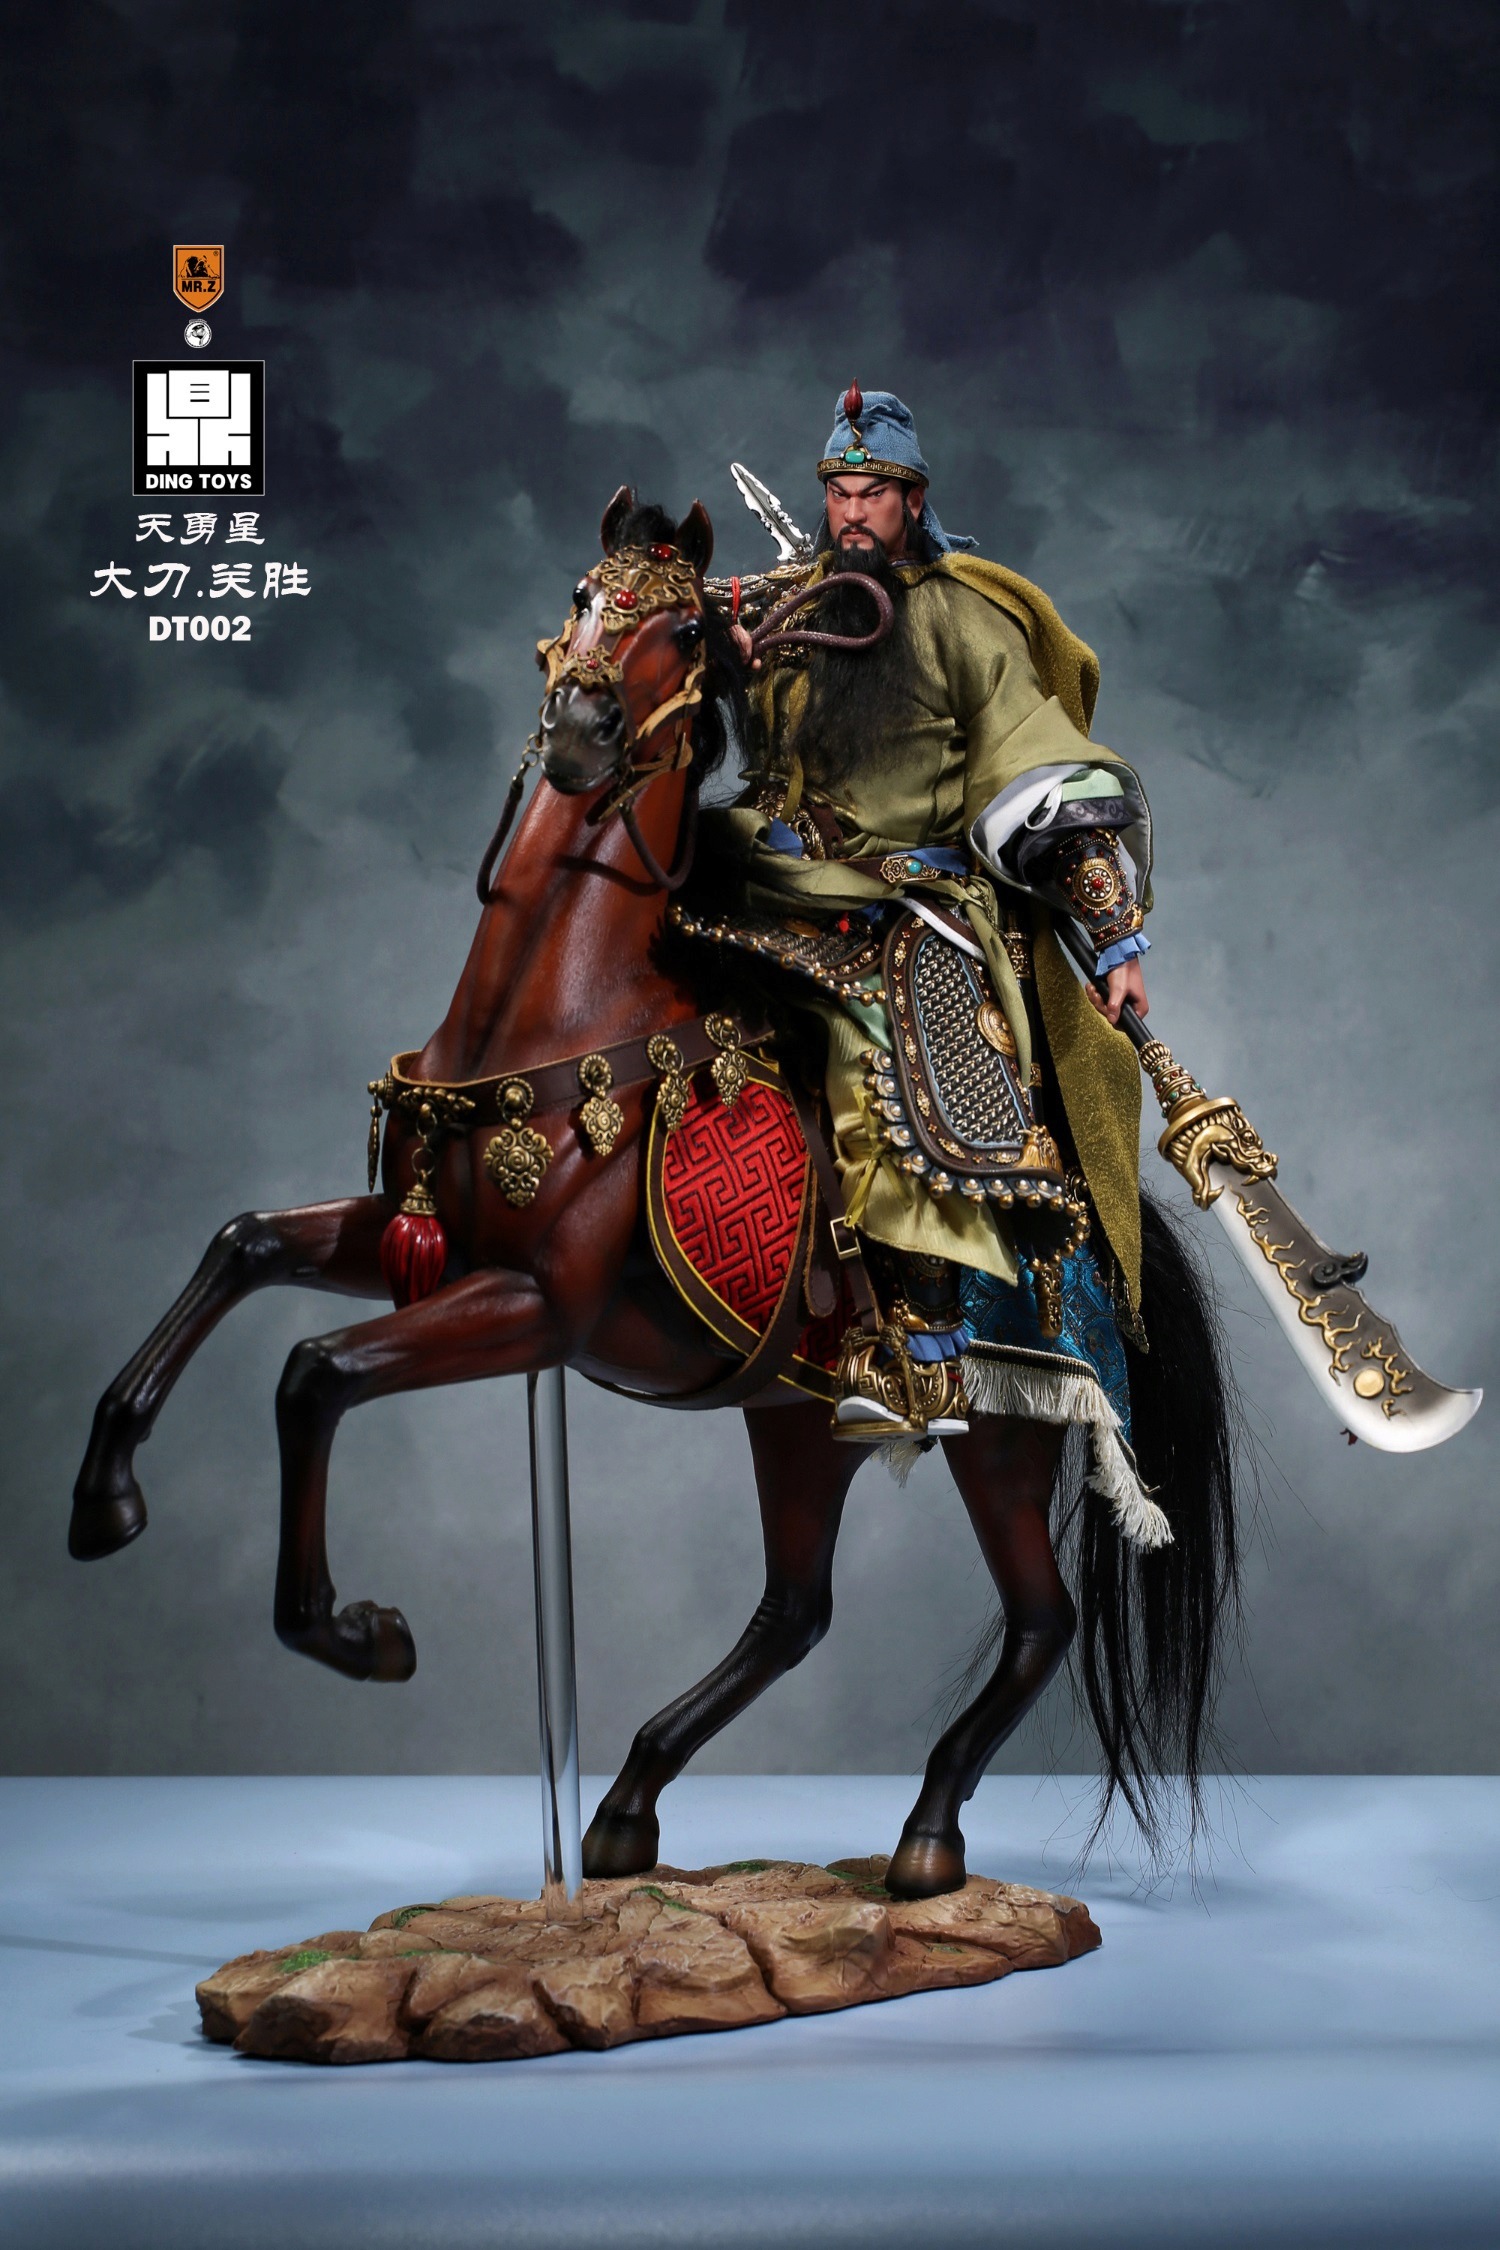 NEW PRODUCT: Mr.Z x Ding Toys DT002 1/6 Scale 《Water Margin》Guan Sheng, War Horse 3431